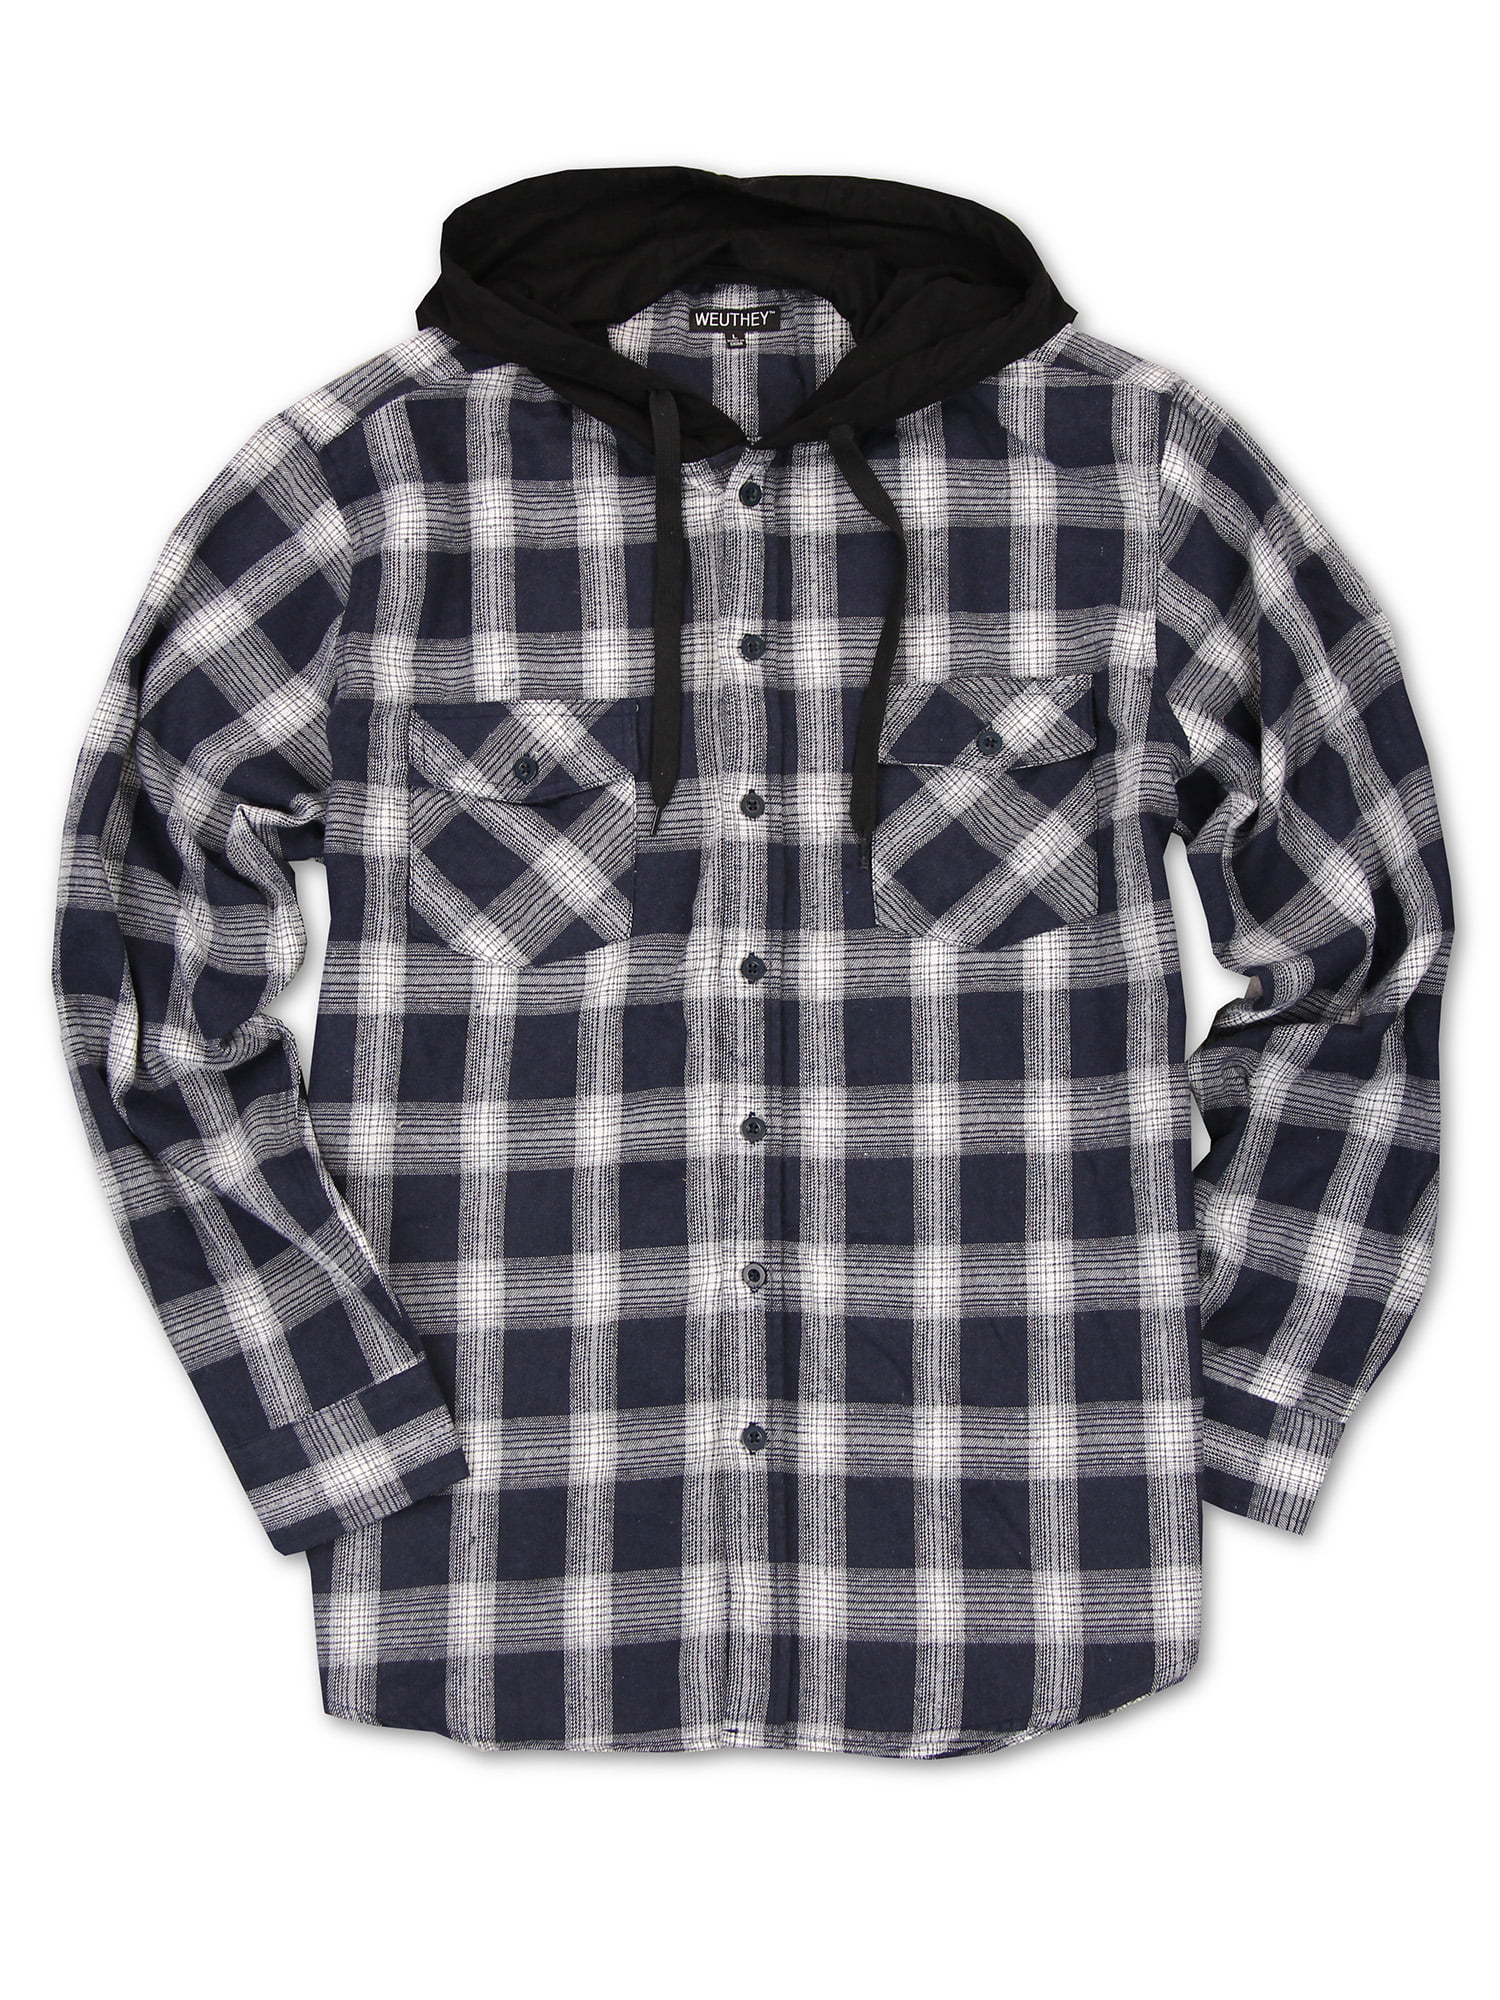 Men's Buffalo Plaid Hooded Flannel Shirt (Navy/White, X-Large)